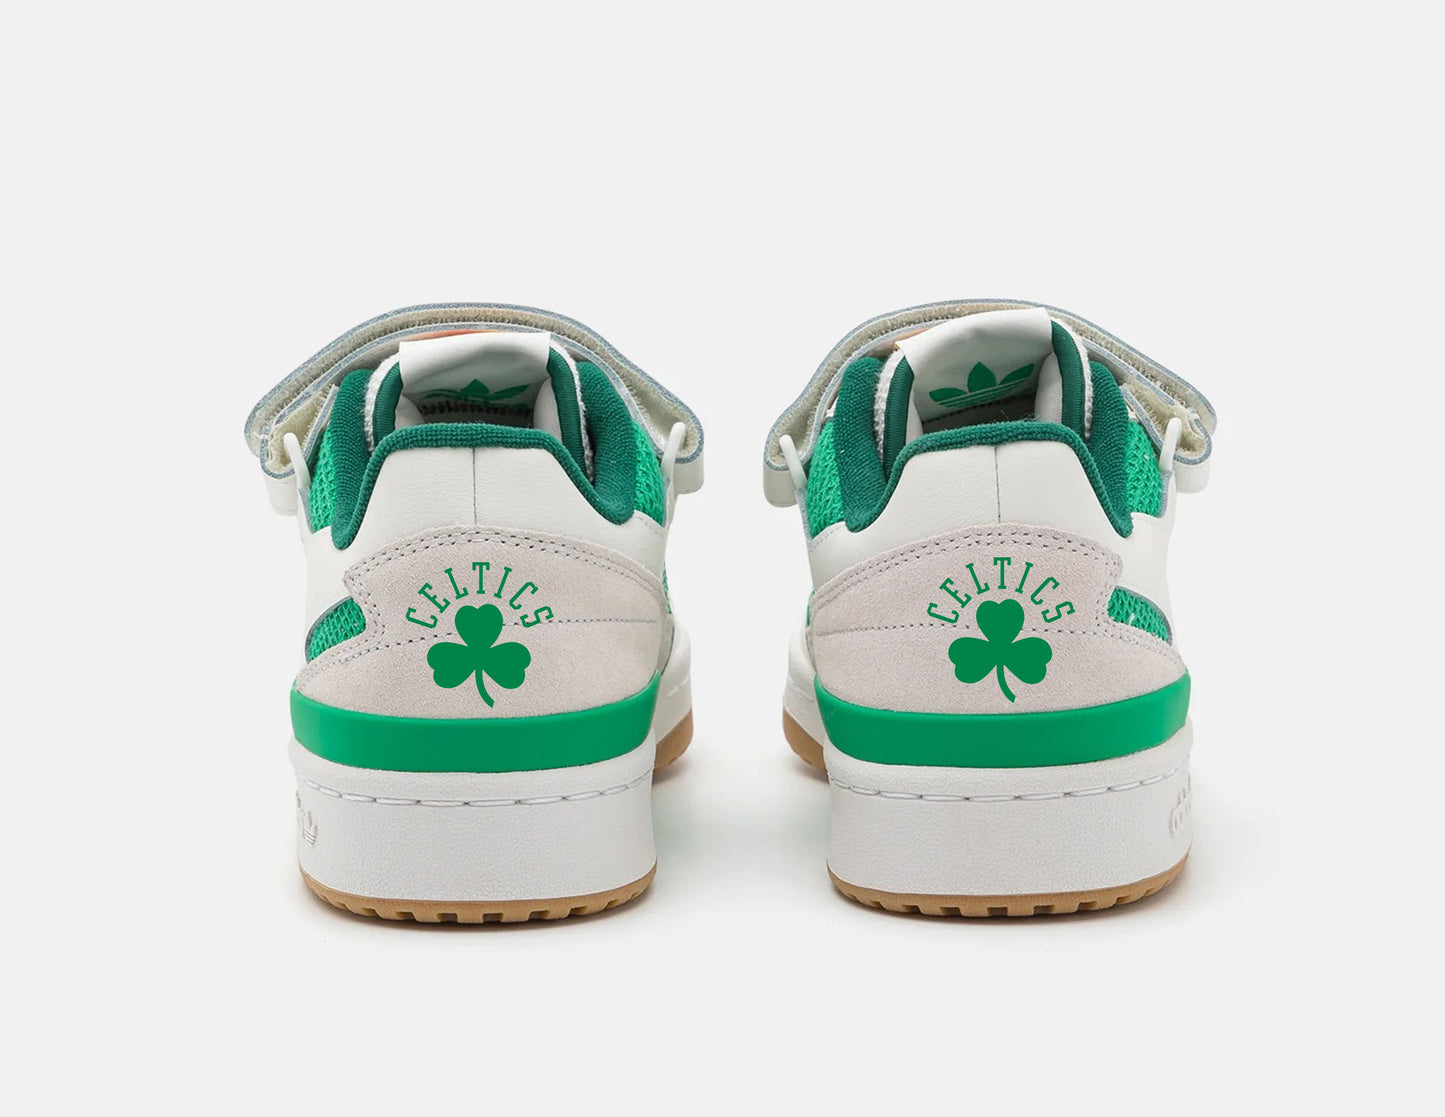 Limited edition White / Green Boston Celtics Adidas Forum low trainers / sneakers